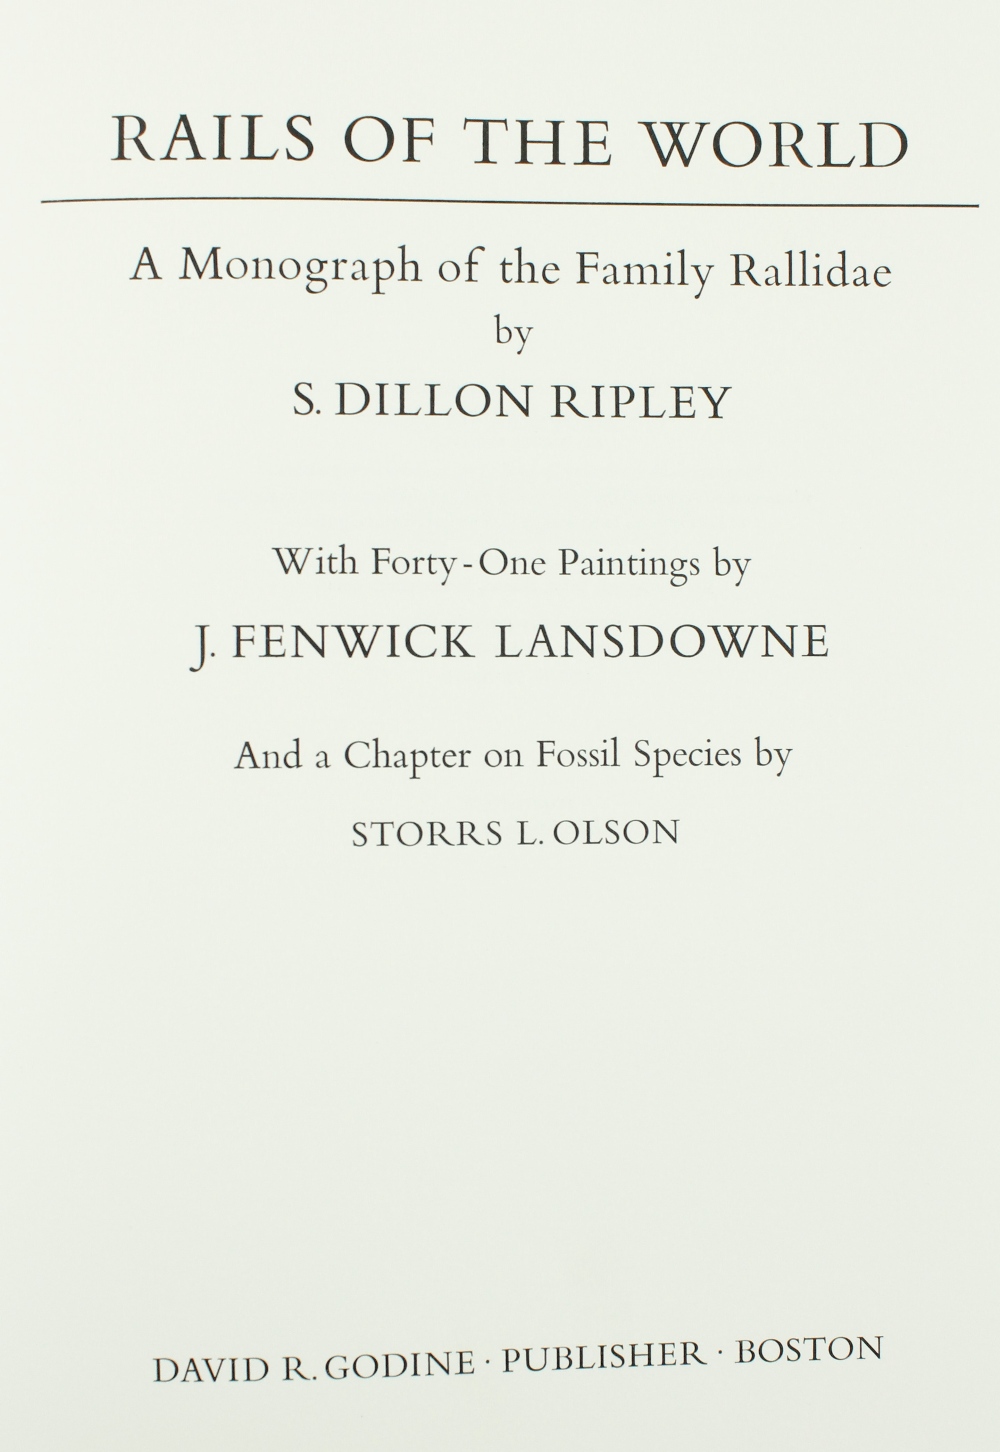 Signed by Author & ArtistIllustrated Volume: Ripley (S. Dillon) & Lansdowne (J.F.)illus. Rails of - Image 2 of 4